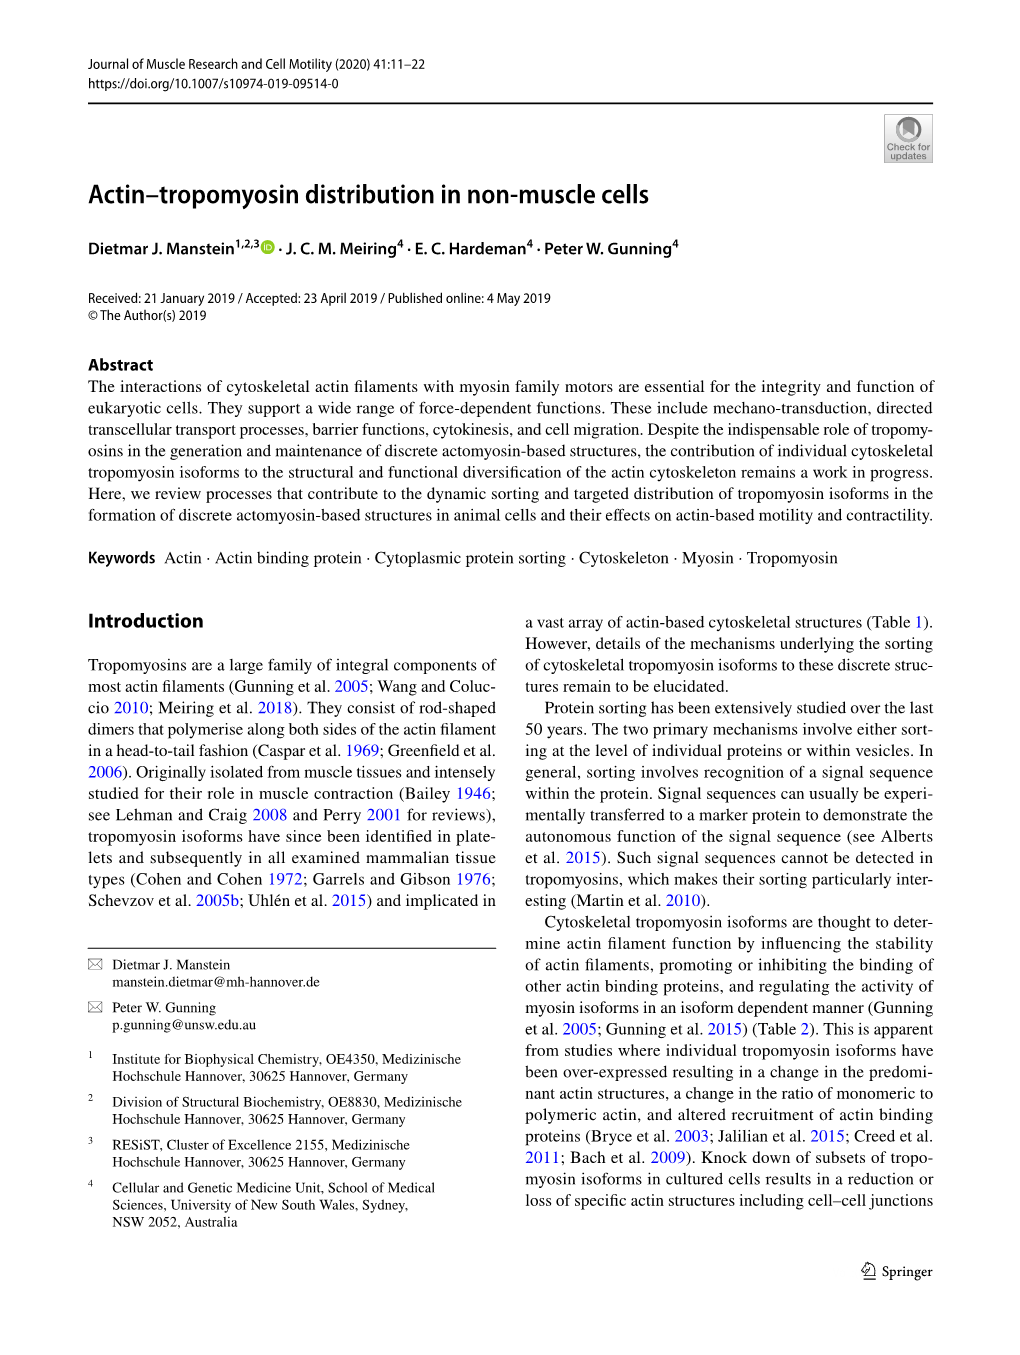 Actin–Tropomyosin Distribution in Non-Muscle Cells